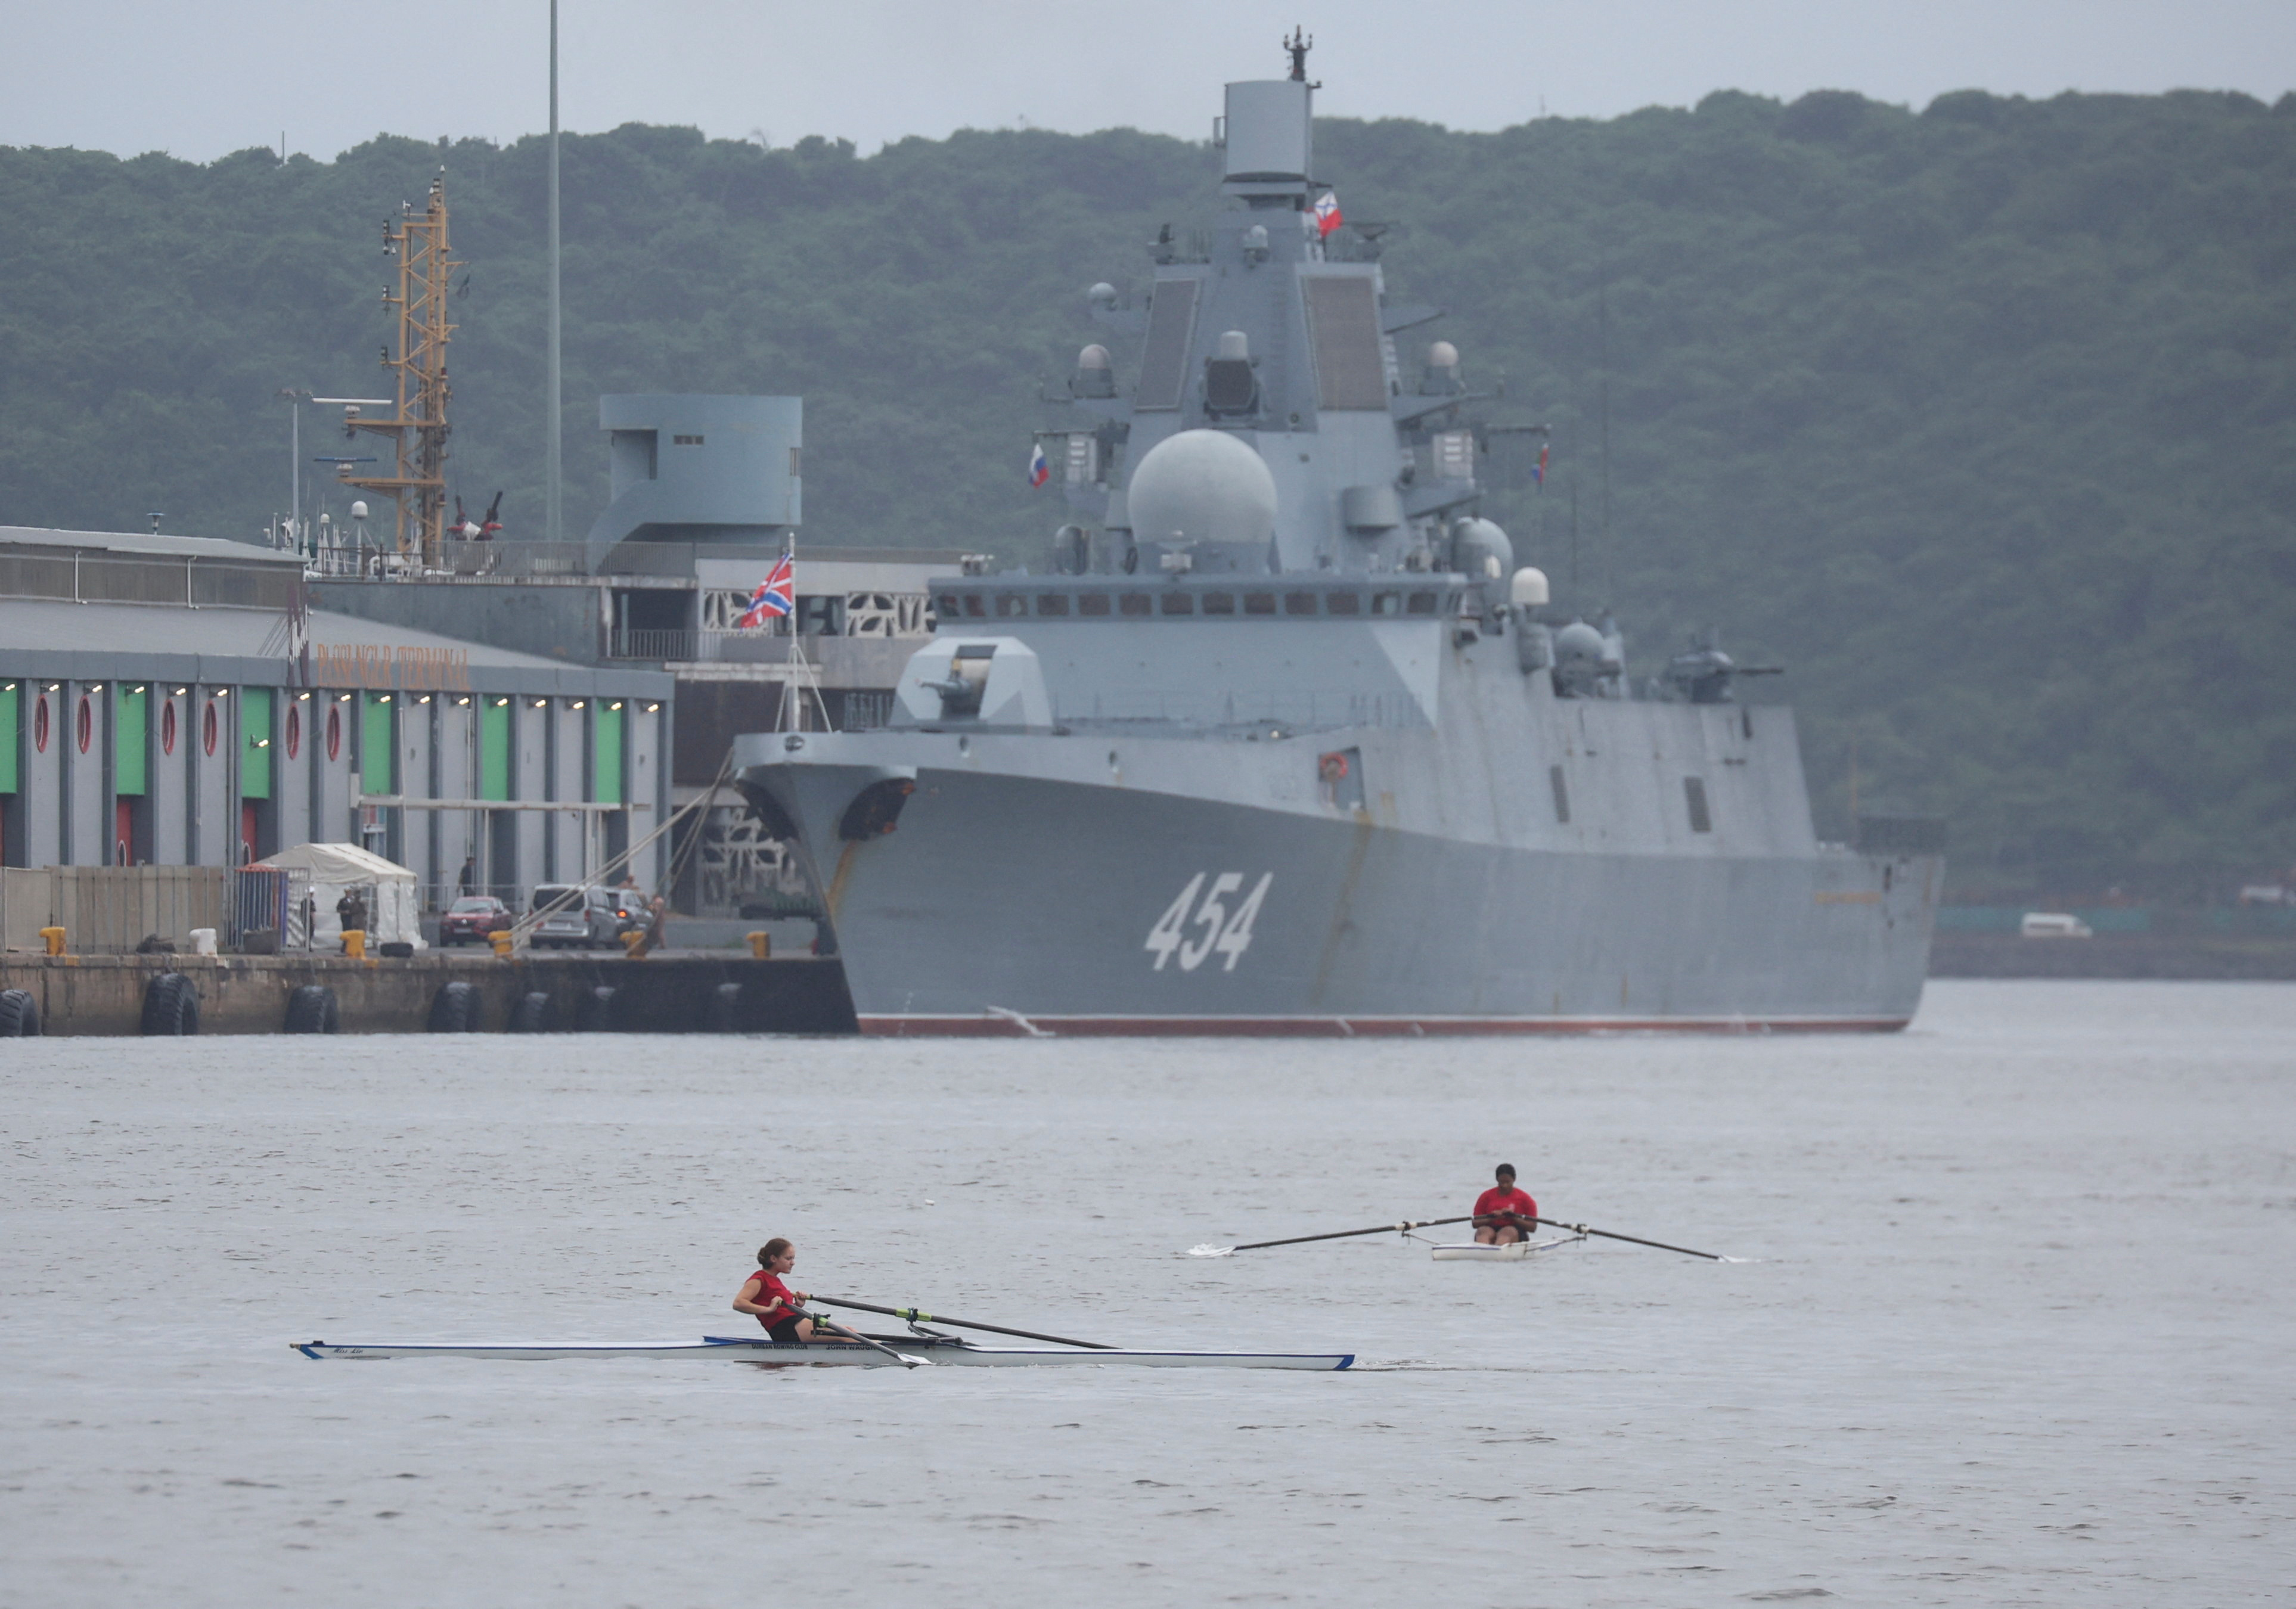 Rowers pass the Russian frigate Admiral Gorshkov which is docked en route to scheduled naval exercises with the South African and Chinese navies in Durban